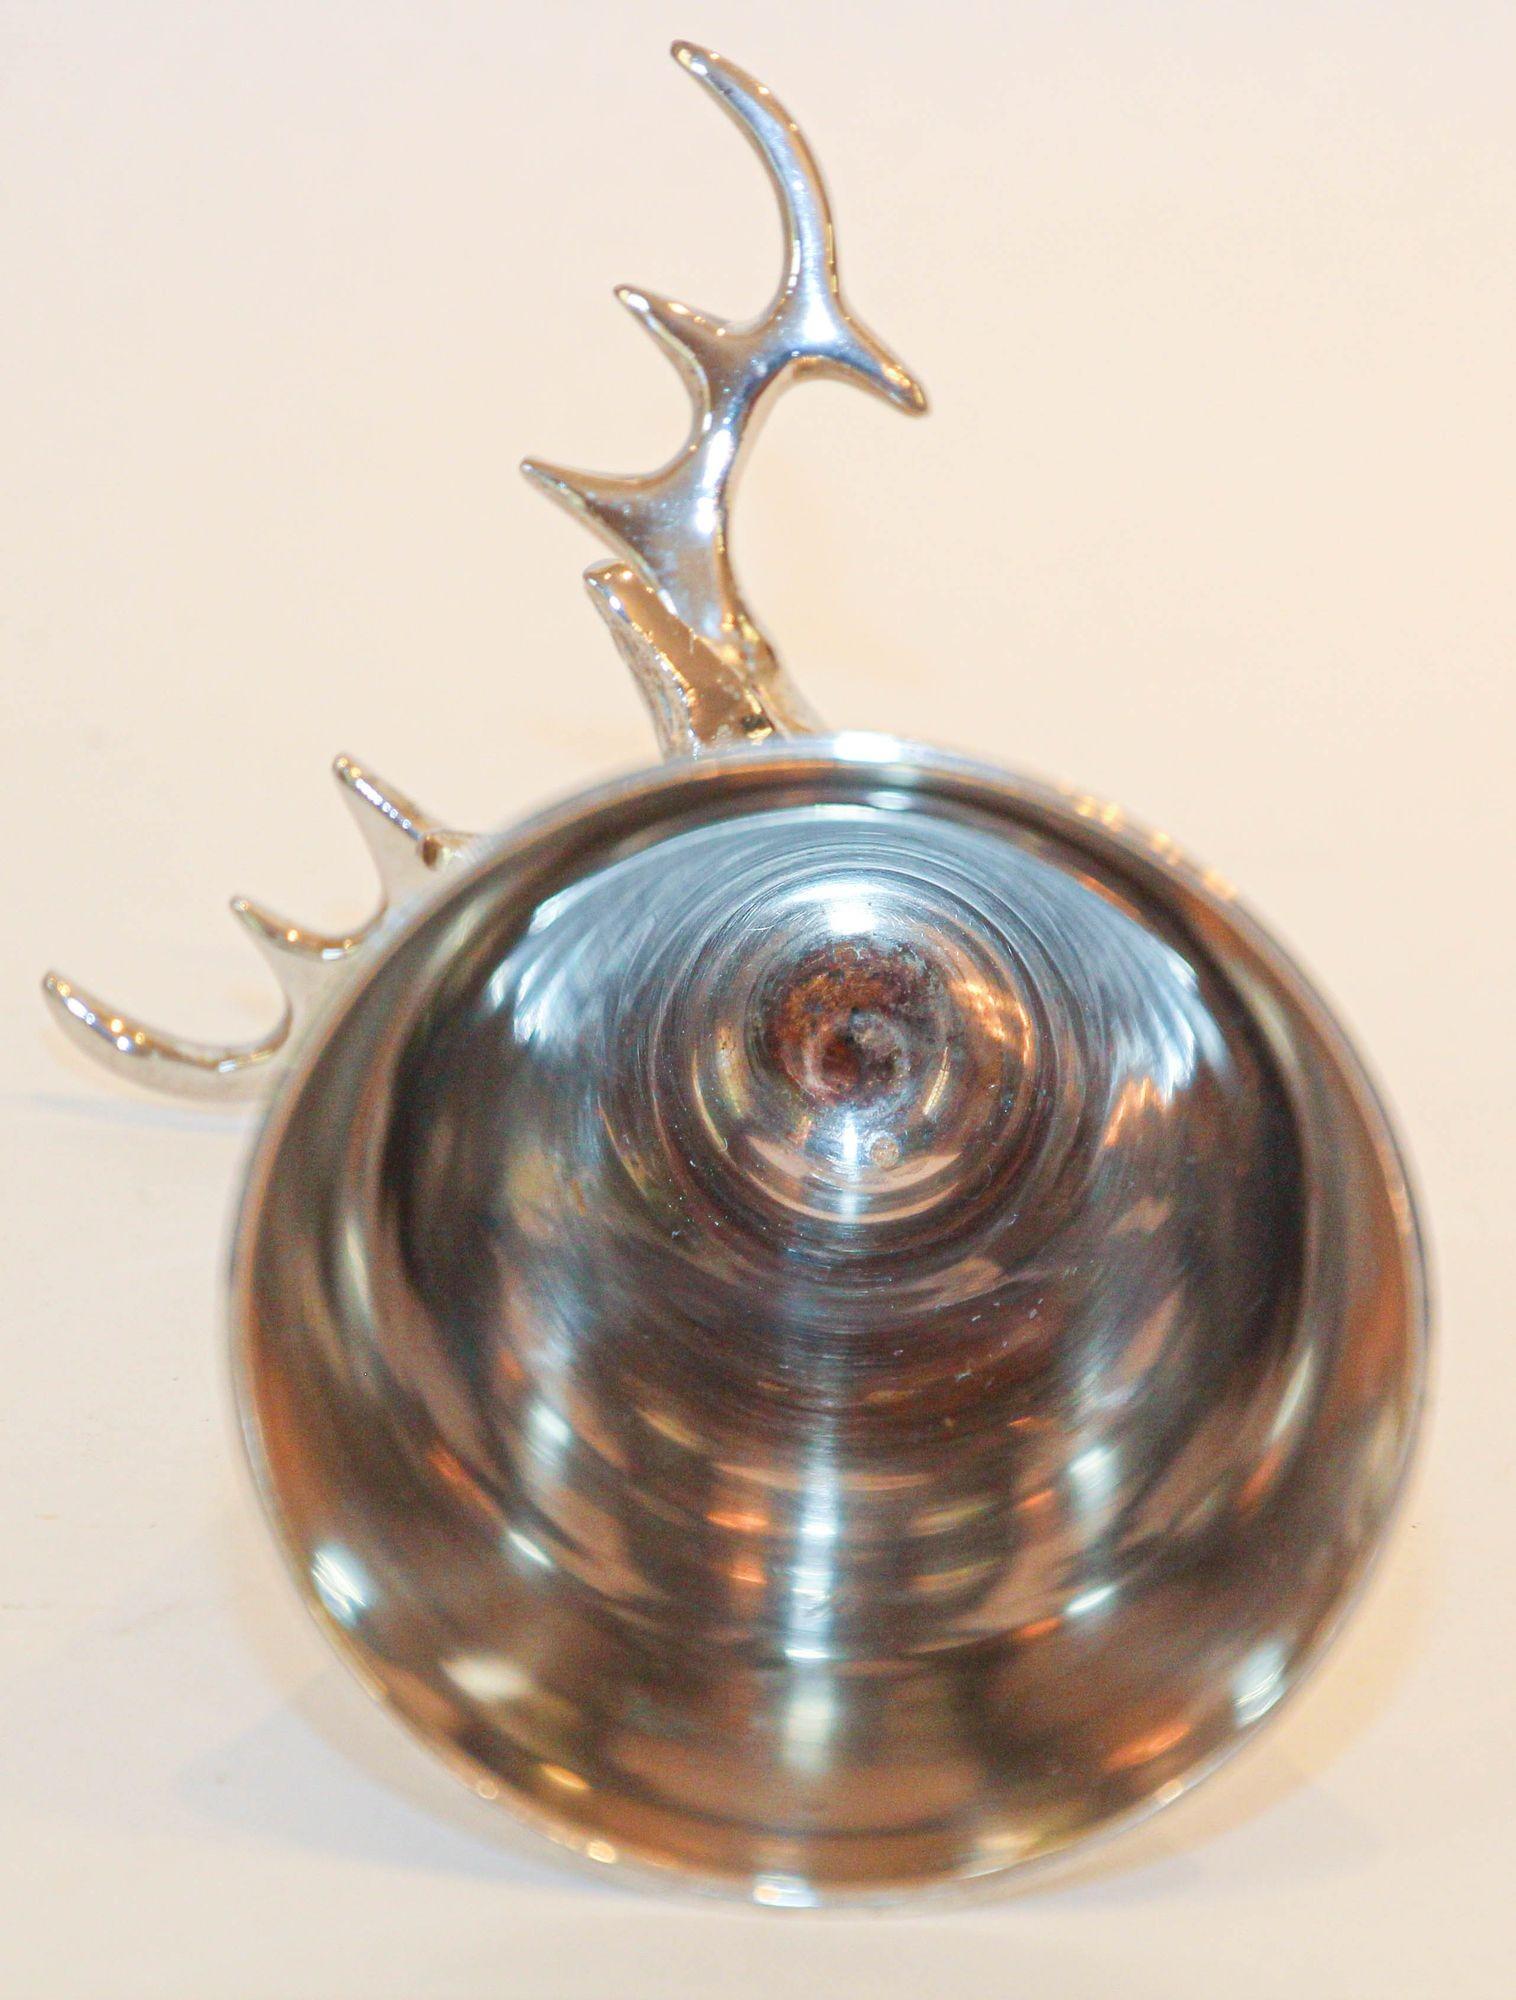 Stag Elk Silver Stirrup Cup Goblet Hunting Equestrian Barware Decor 1970s For Sale 3